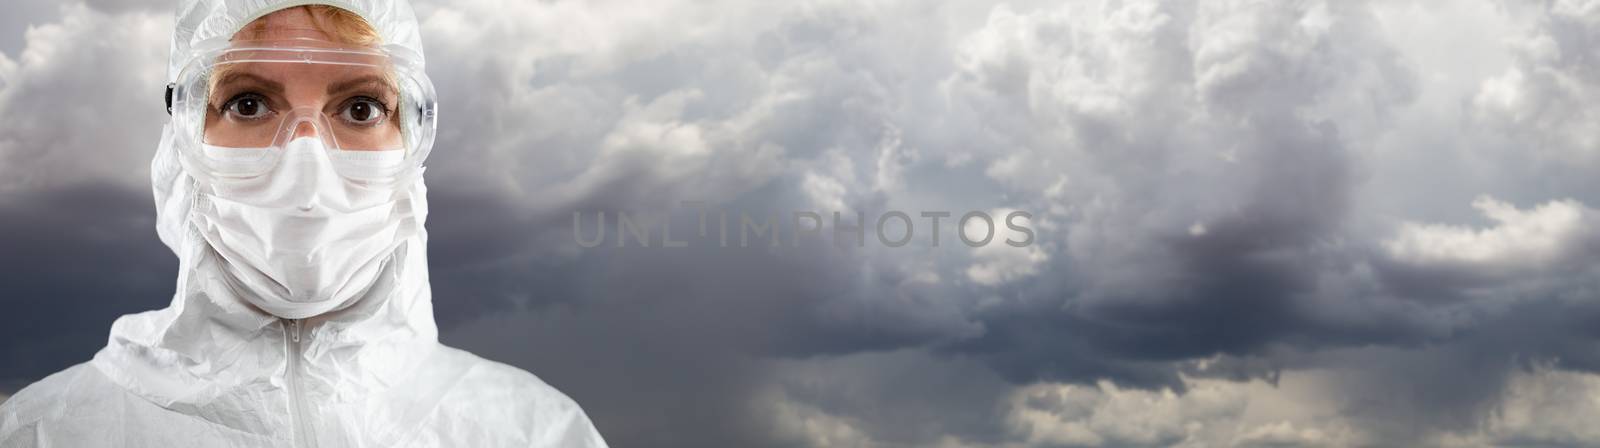 Female Medical Worker Wearing Protective Face Mask and Gear Against Cloudy Stormy Sky.